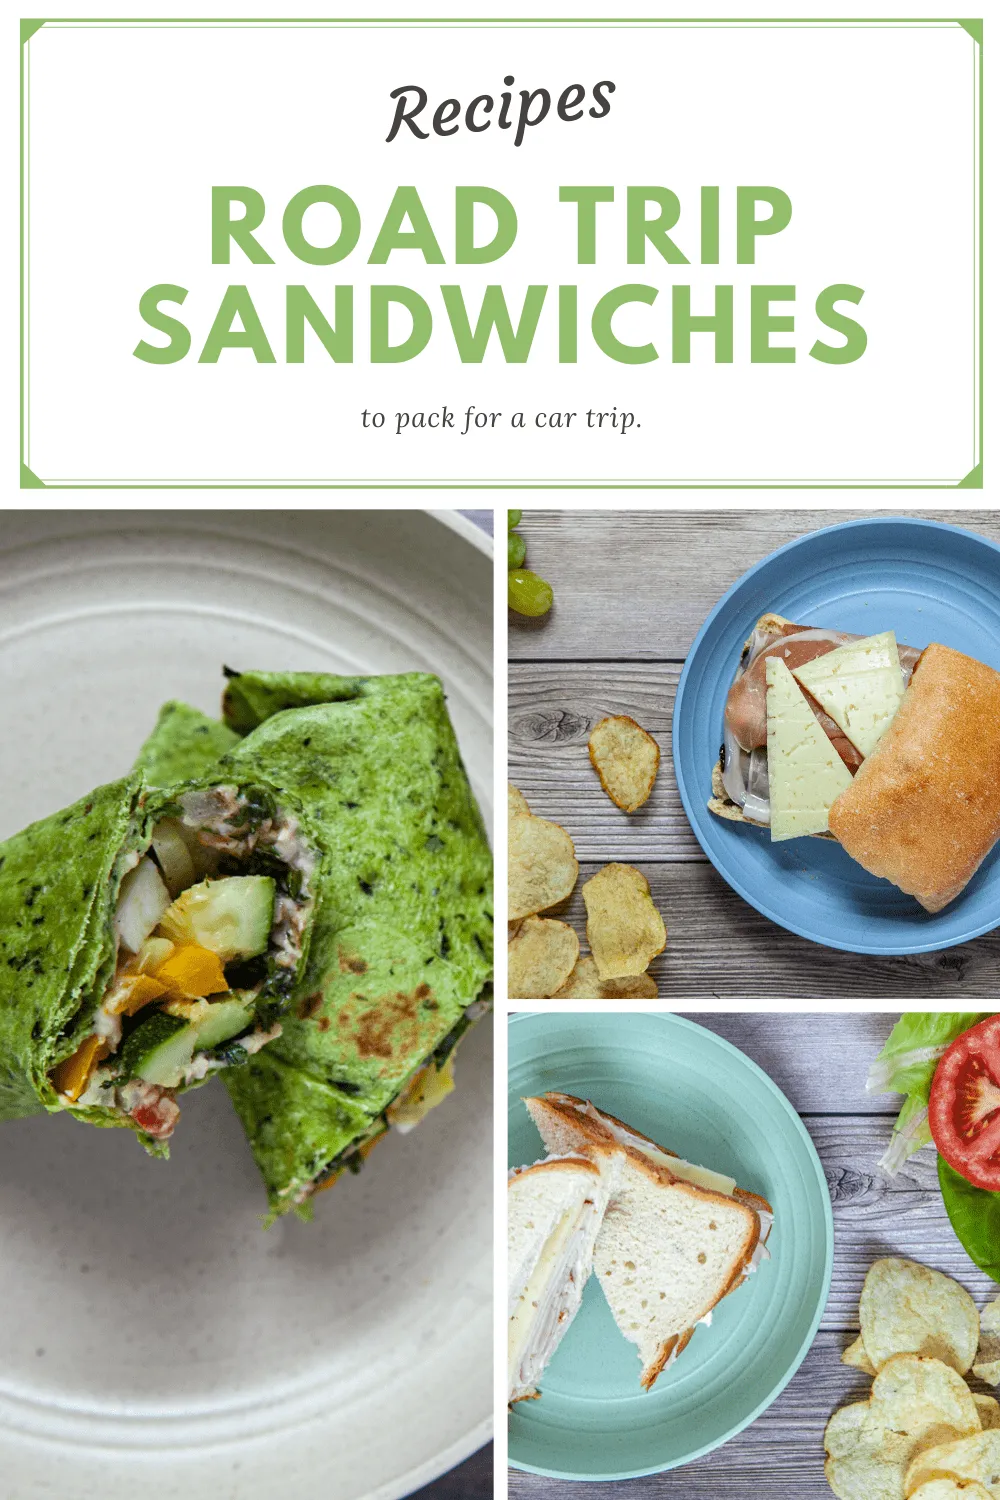 Road trip sandwiches make for quick and easy lunches for car trips. Here are some recipes for road trip sandwiches and tips on how to pack your meals to go. Easy Road trip food and meals to pack in your cooler. #RoadTripMeals #RoadTripMealsForAdults #RoadTripMealsToPack #RoadTripMealsForFamilies #MakeAheadRoadTripMeals #HealthyRoadTripMeals #CheapRoadTripMeals #RoadTripLunches #EasyRoadTripMeals #RoadTripMealsForKids  #RoadFood #RoadFoodIdeas #RoadFoodStops #RoadTripFood #LongRoadTripFood